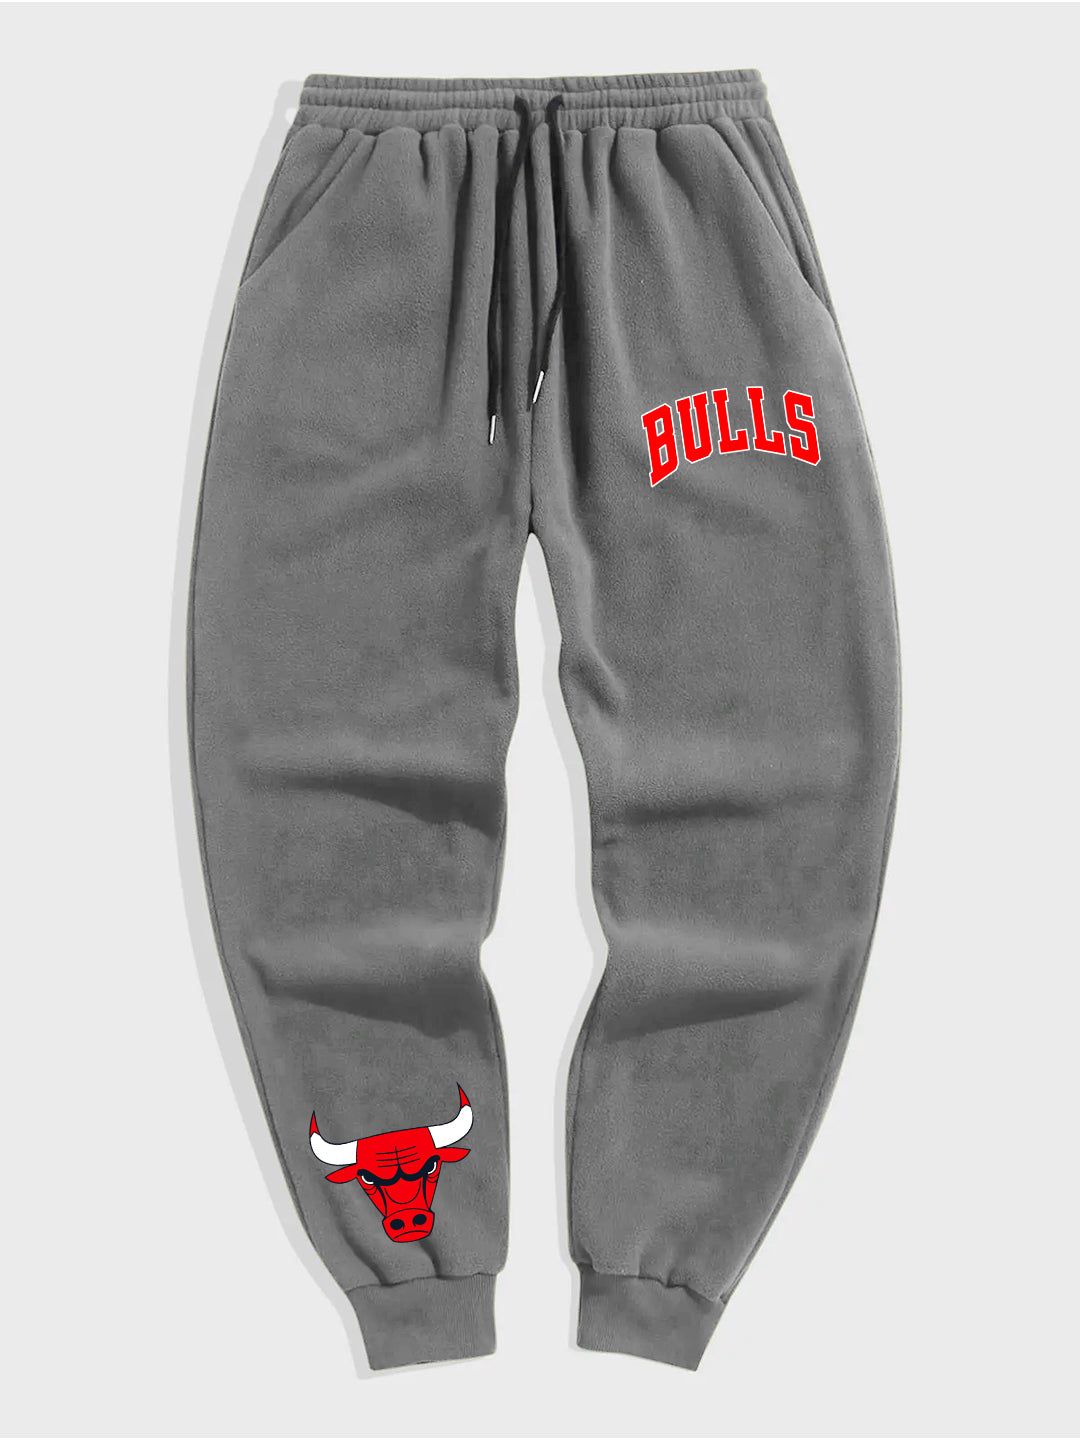 Limited Edition Printed Heavy Fleece Trouser / Jogger Pant